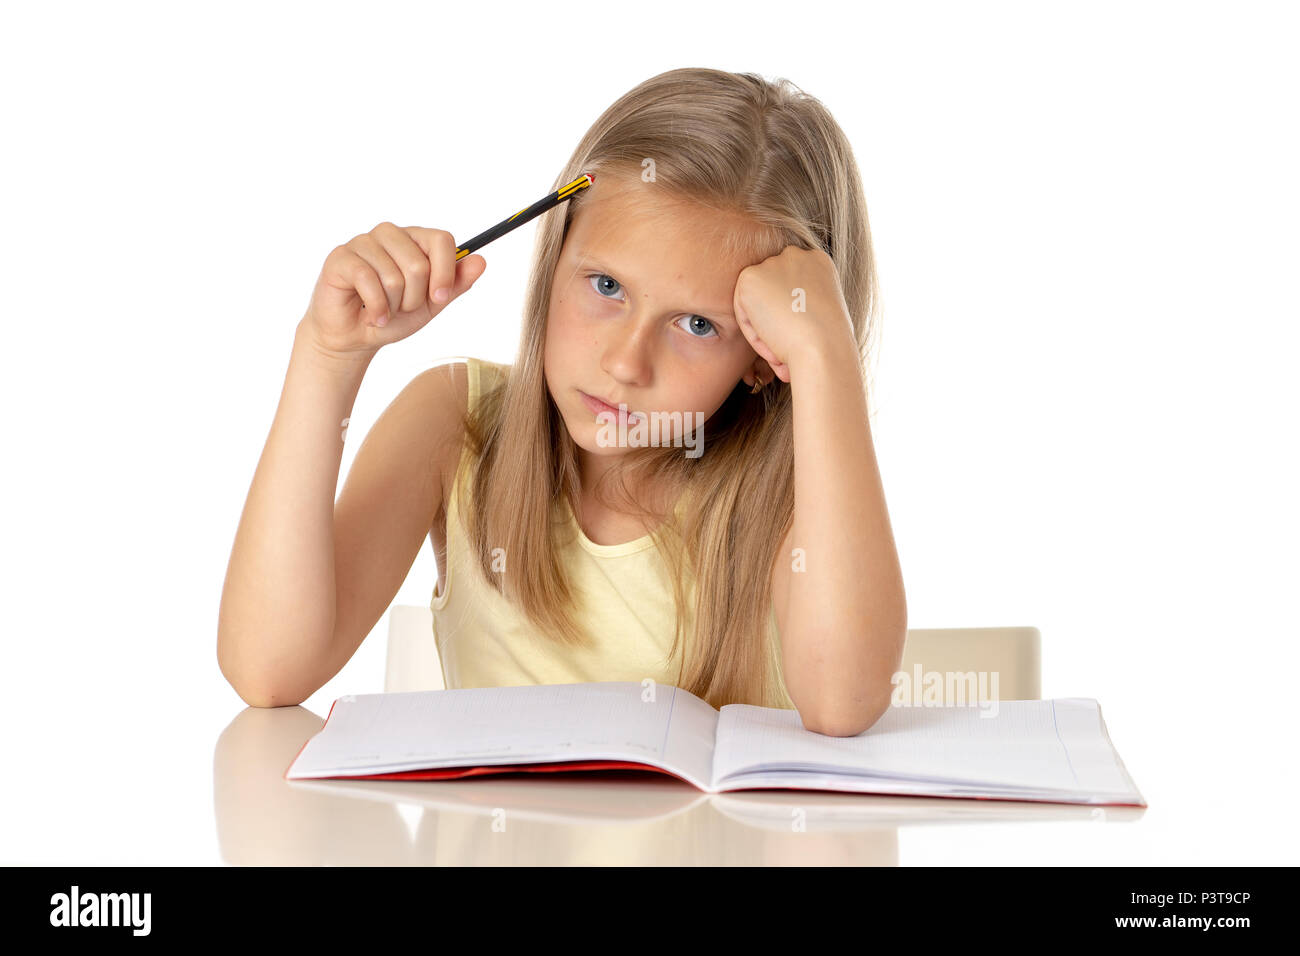 education, elementary school, childhood and emotions concept sad or bored little student girl studying looking frustrated with learning problems on wh Stock Photo